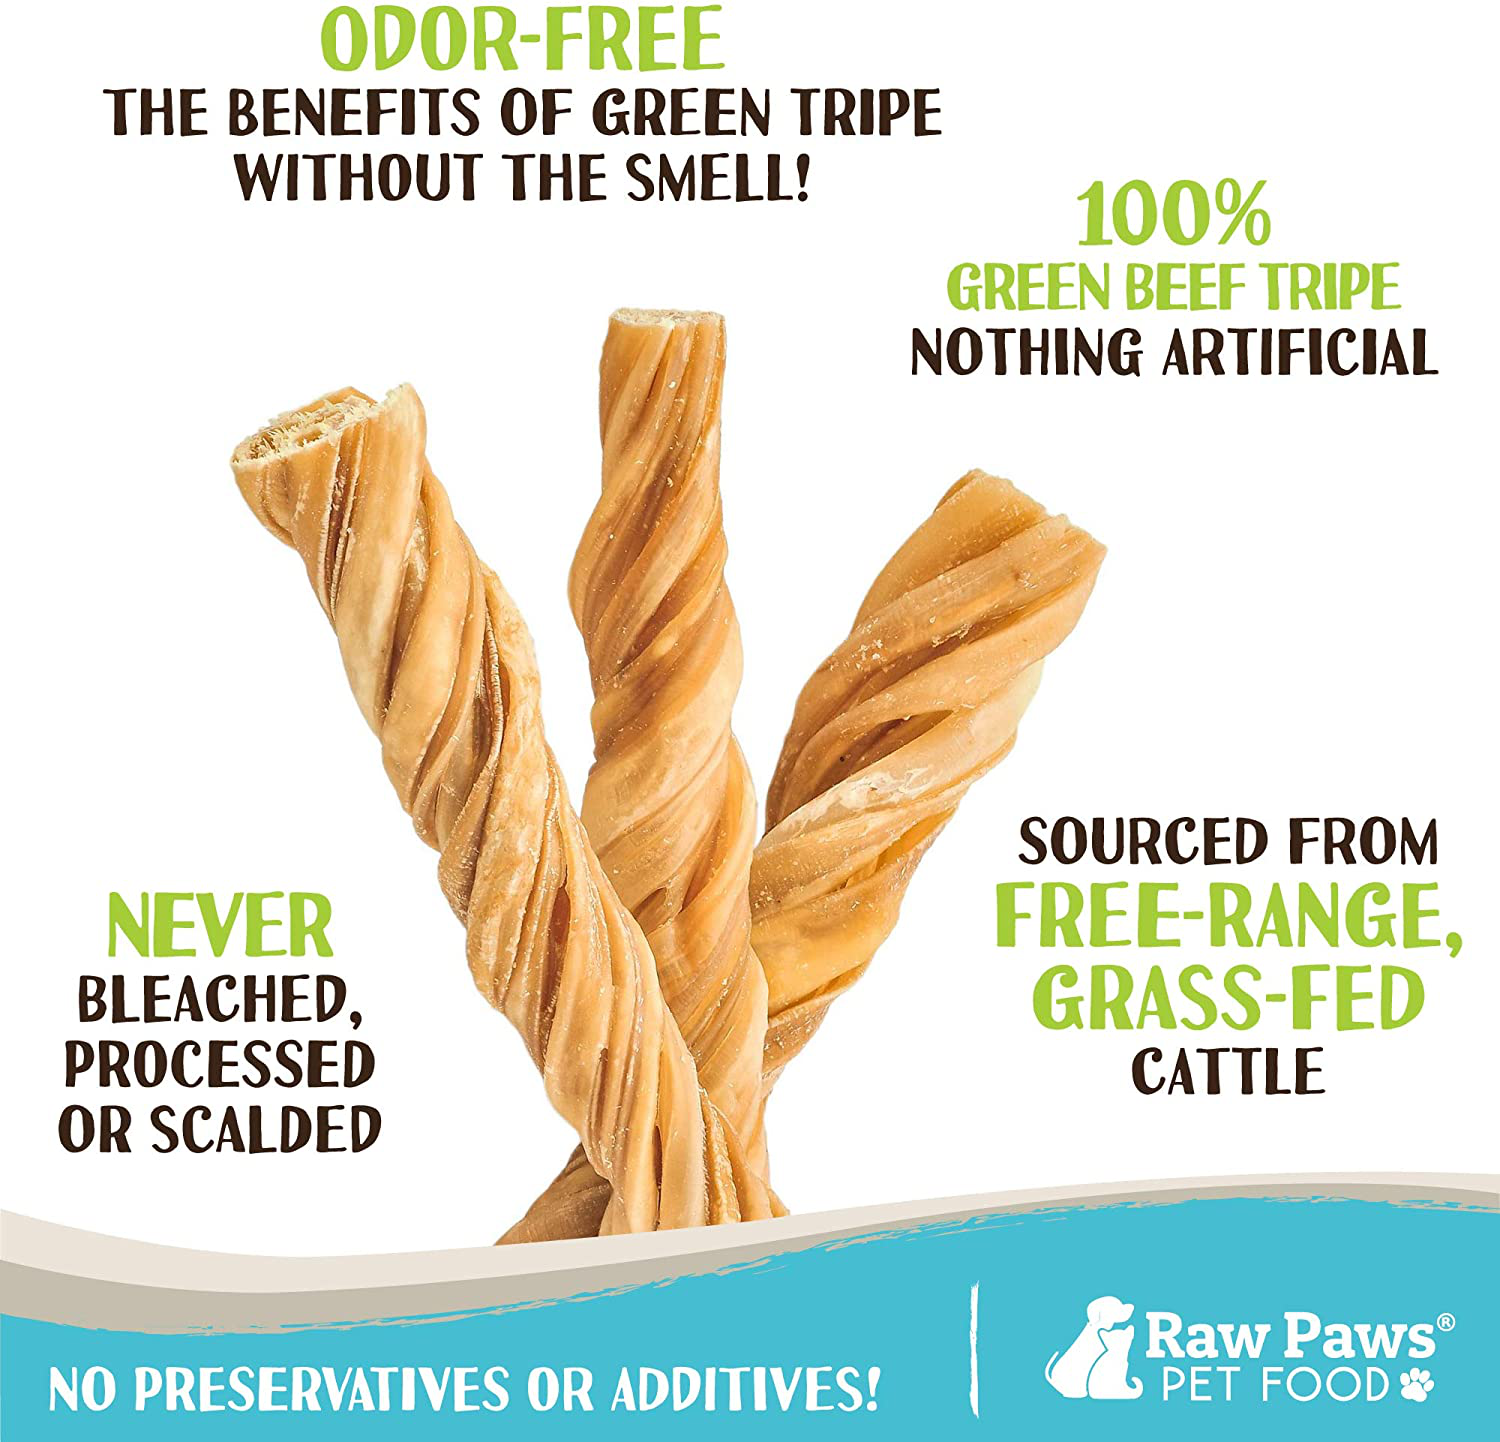 Raw Paws Premium 5" Green Beef Tripe Twists for Dogs - Packed in USA - Grass-Fed, Free-Range Green Tripe Sticks for Dogs - Odor-Free, Crunchy Tripe Dog Treats - All-Natural Tripe Sticks Chews